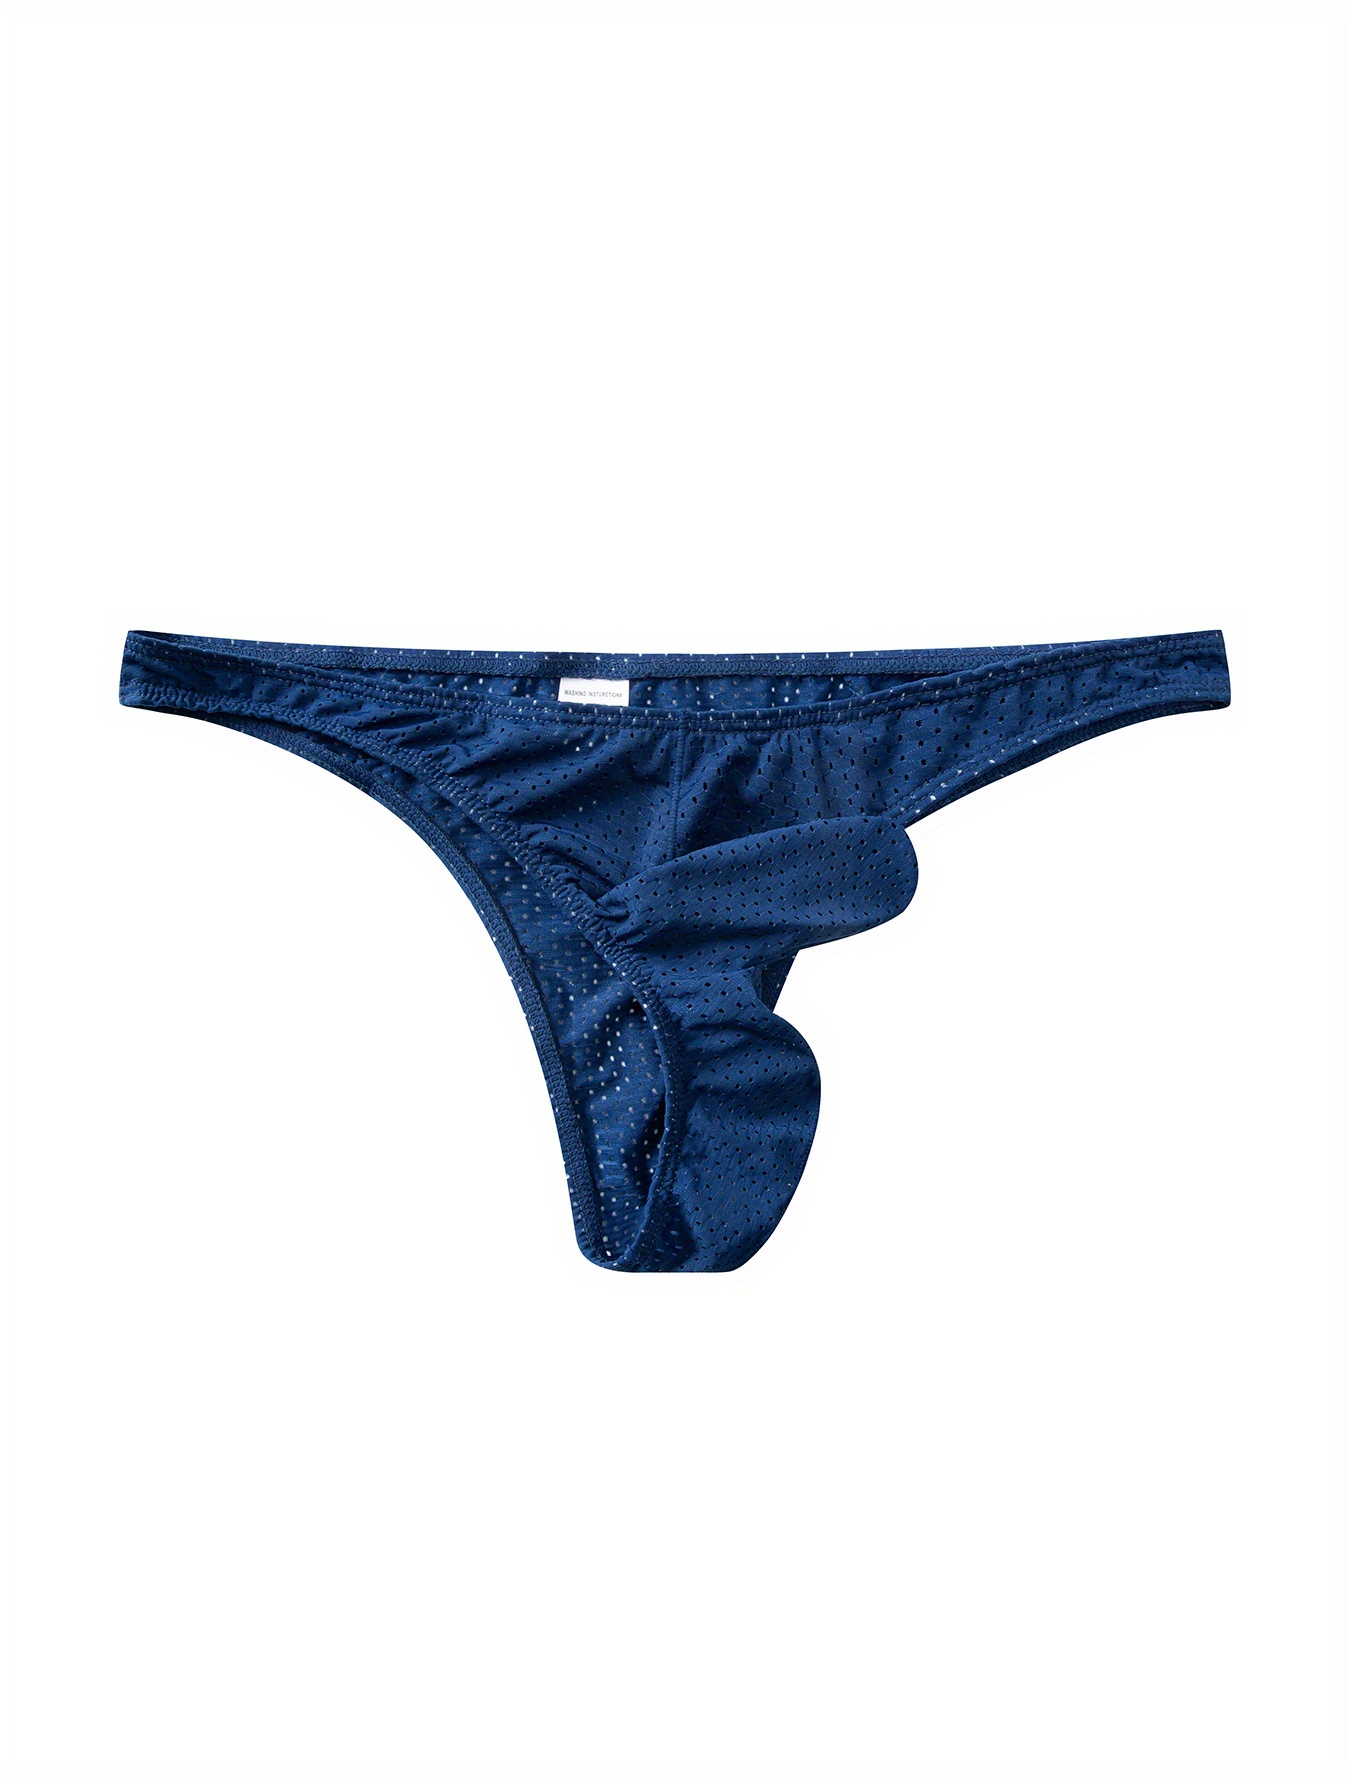 Mens Sheer Elephant Trunk Thong Thong Briefs Underwear Panties From  Acadiany, $7.23